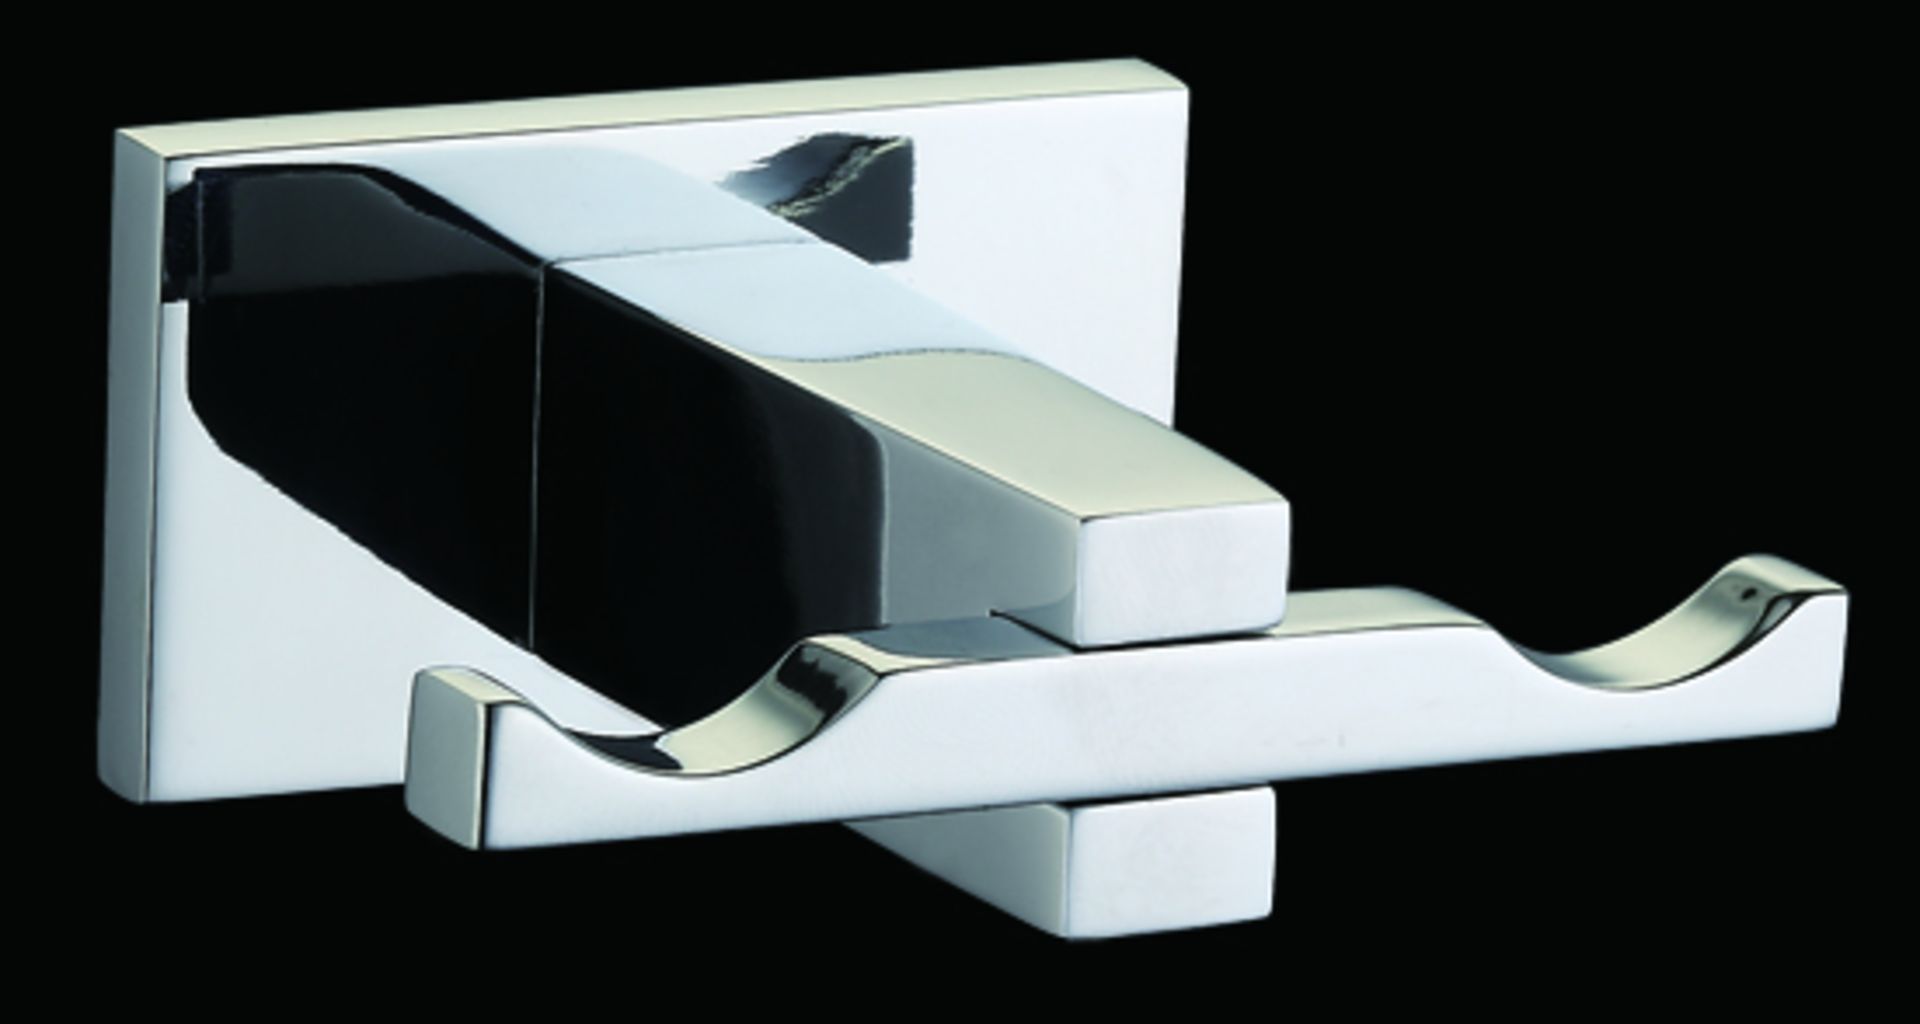 1 x Vogue Series 6 Bathroom Accessory Set in Chrome - New Boxed Stock - Includes 3 Piece Set - Image 2 of 4